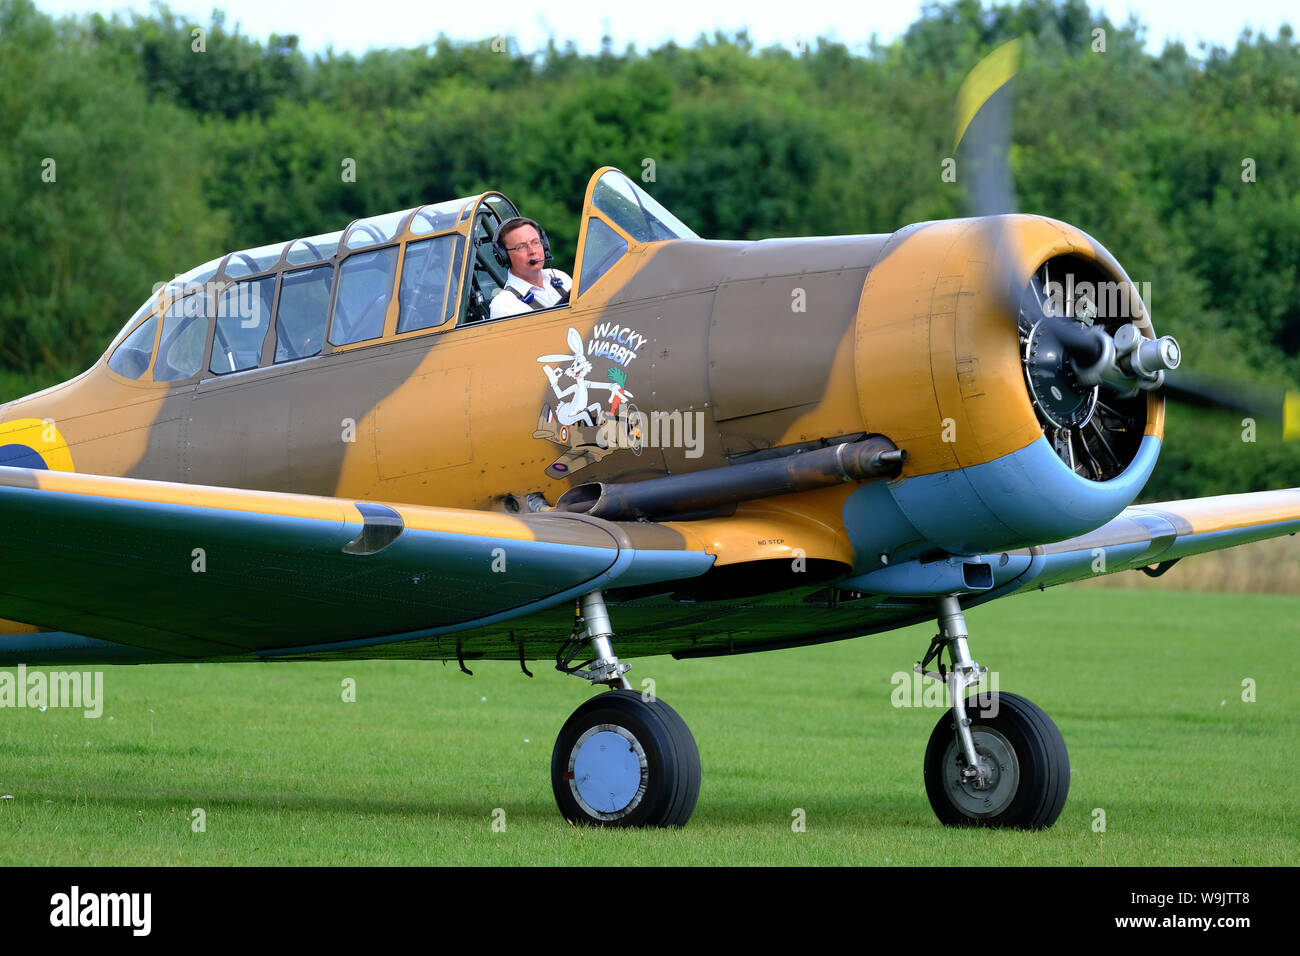 North American Harvard second world war advanced pilot training aircraft. Also known as the Texan. Stock Photo